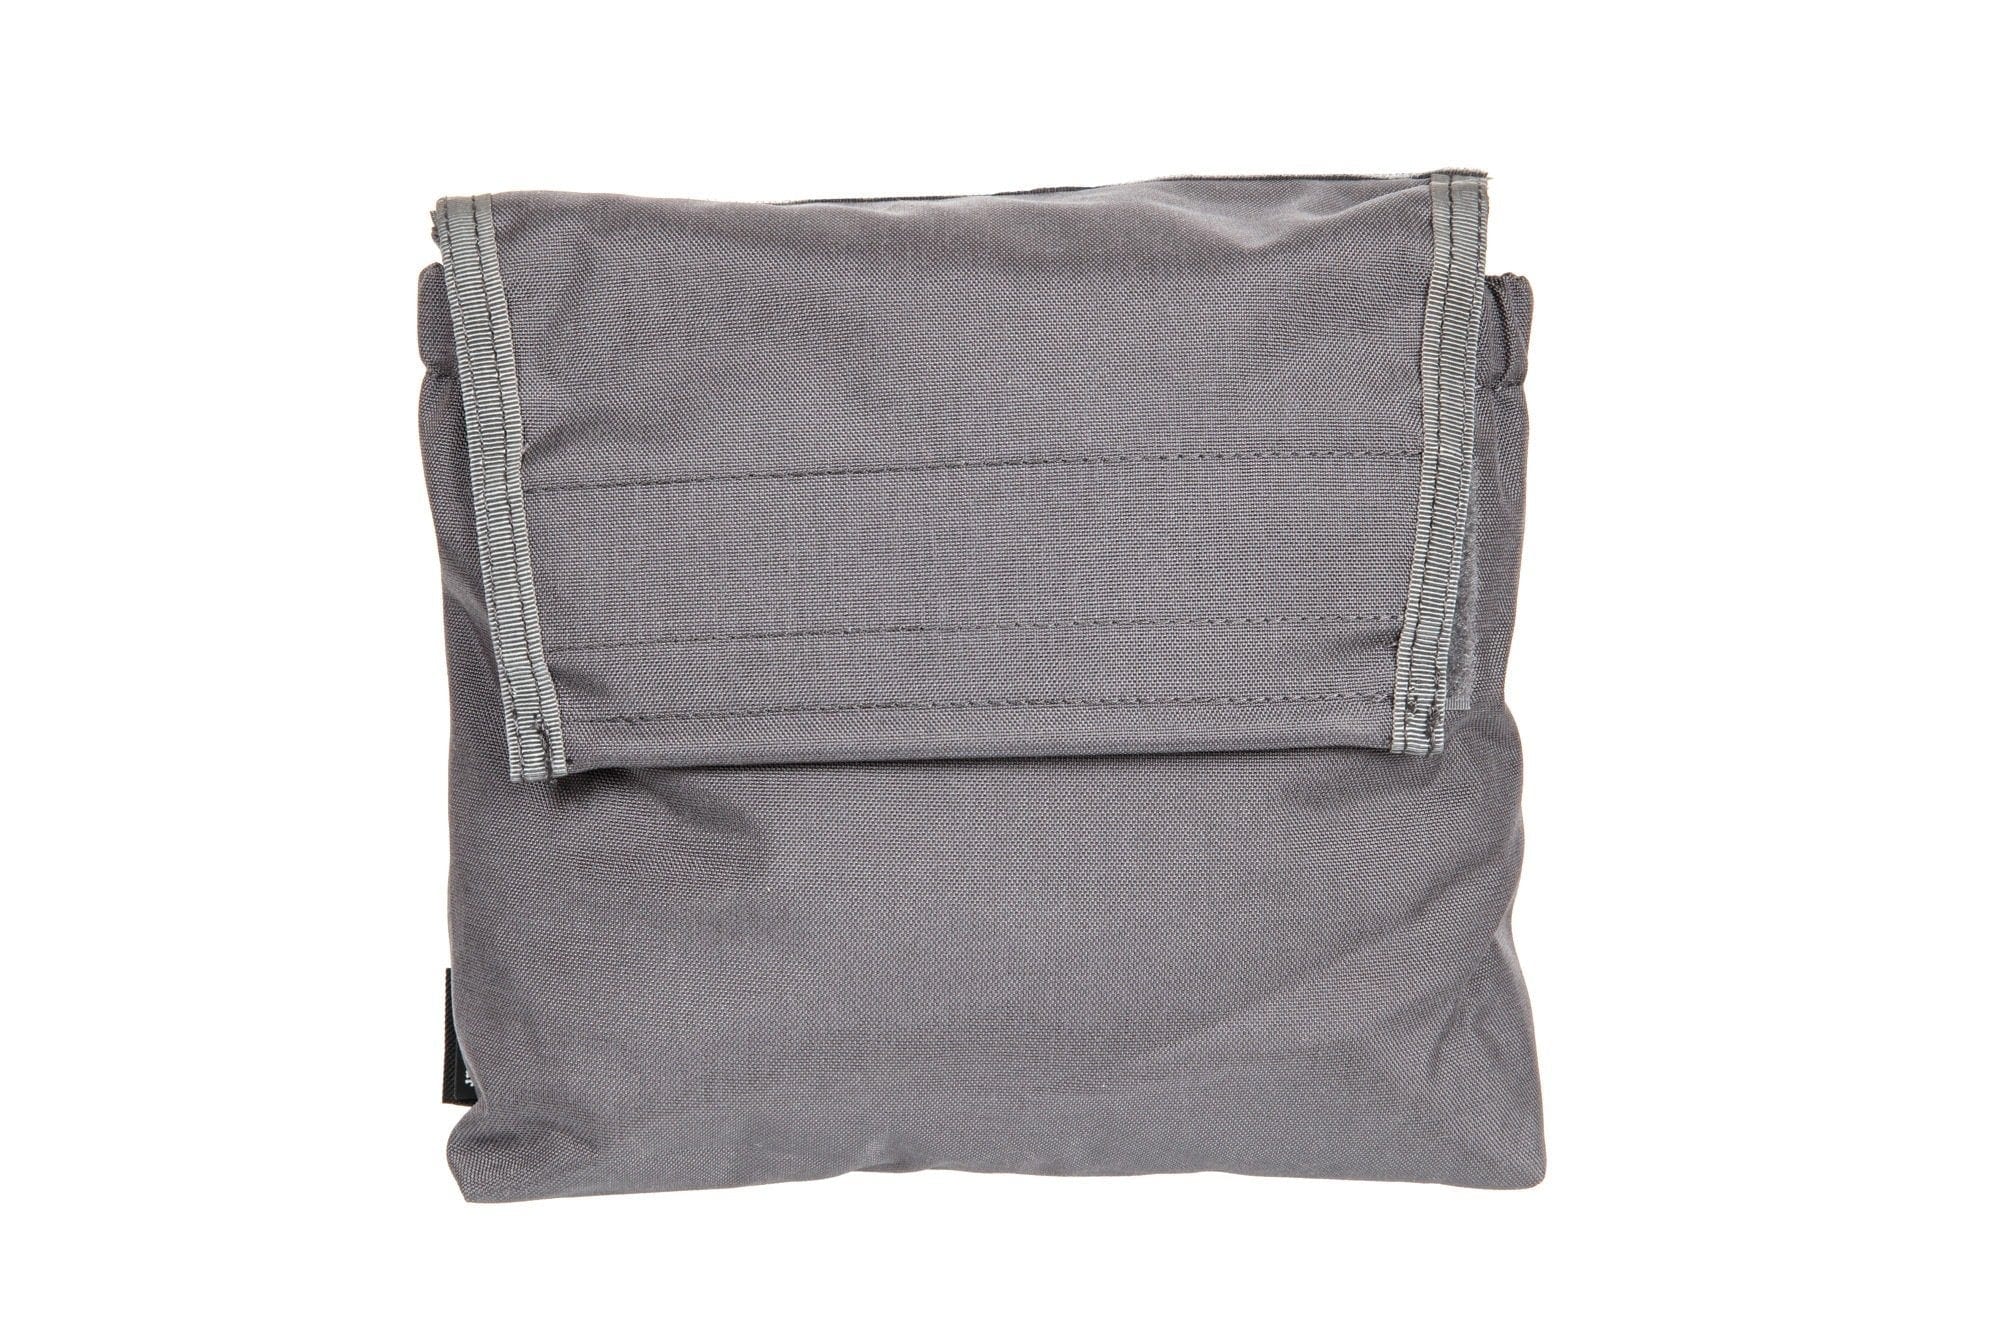 Paste Pouch for Vest / Tactical Belt - Gray Wolf by Emerson Gear on Airsoft Mania Europe